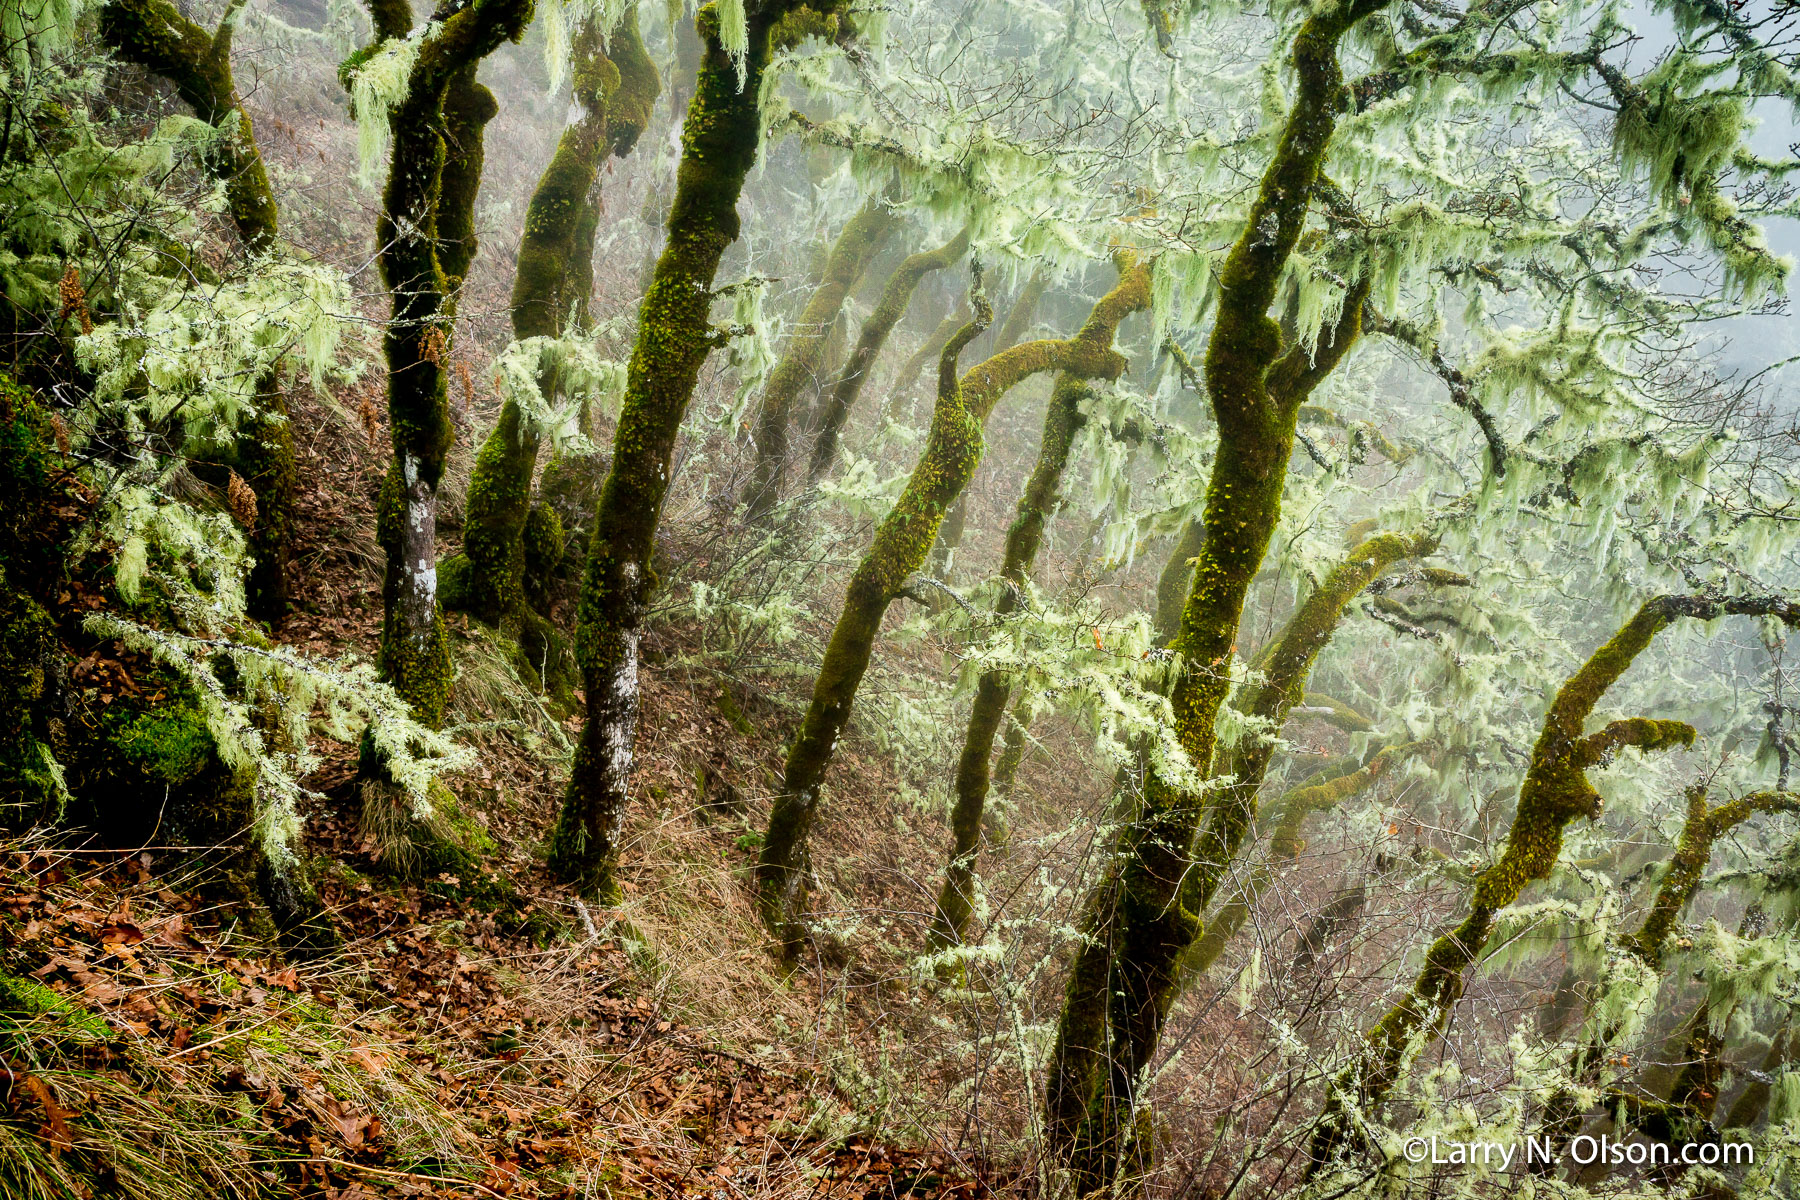 Oak Grove, Eagle Creek, Columbia Gorge, OR | A grove of standing oaks are covered in lichen and silhouetted in the fog.